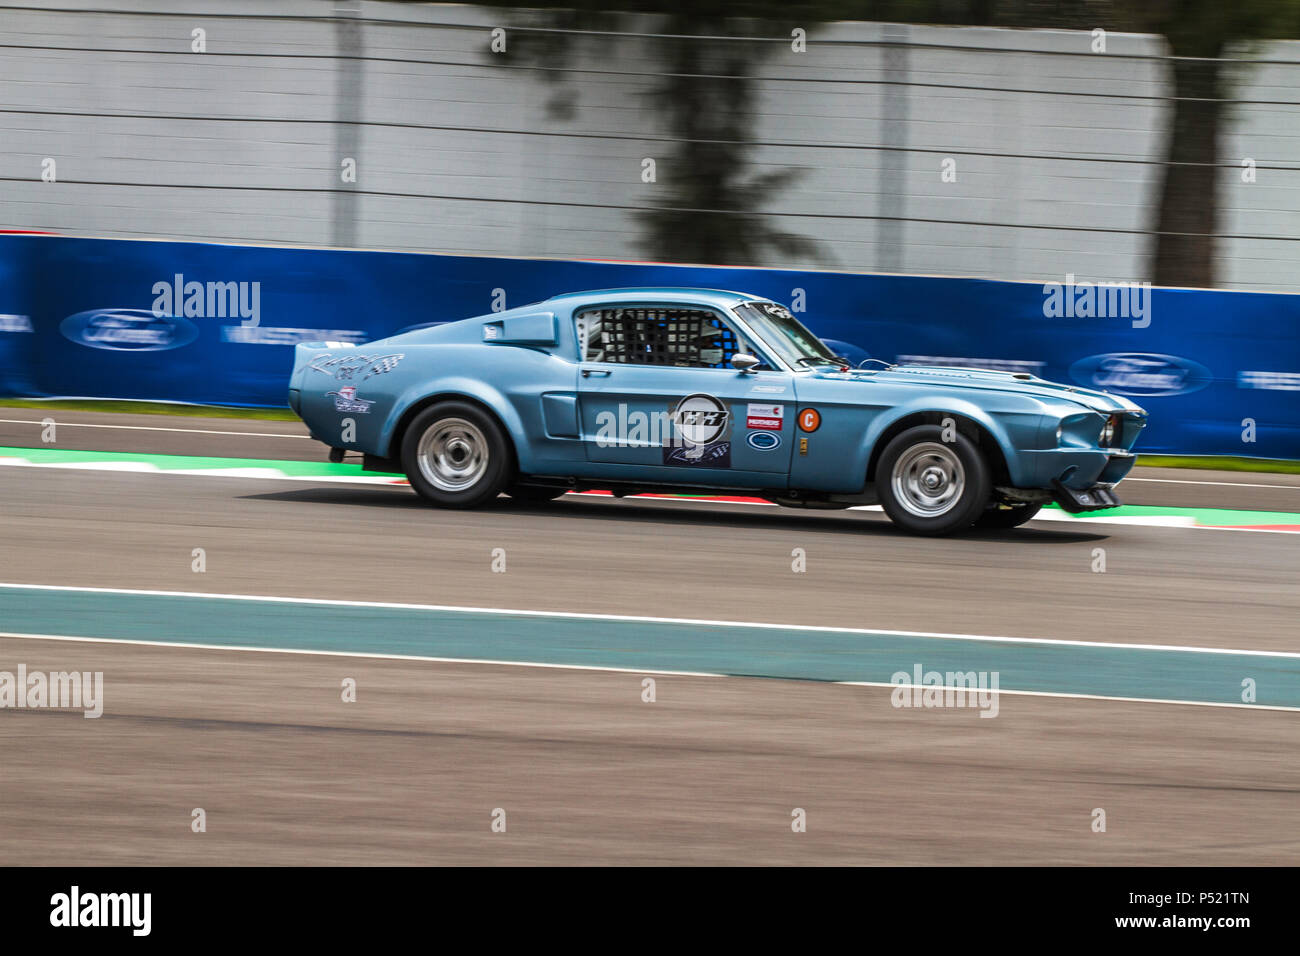 Mexico City, Mexico – September 01, 2017: Autodromo Hermanos Rodriguez. FIA World Endurance Championship WEC. 1967 Mustang Shelby GT500 No.133 running at the free practice for the Mexico Vintage Series. Stock Photo